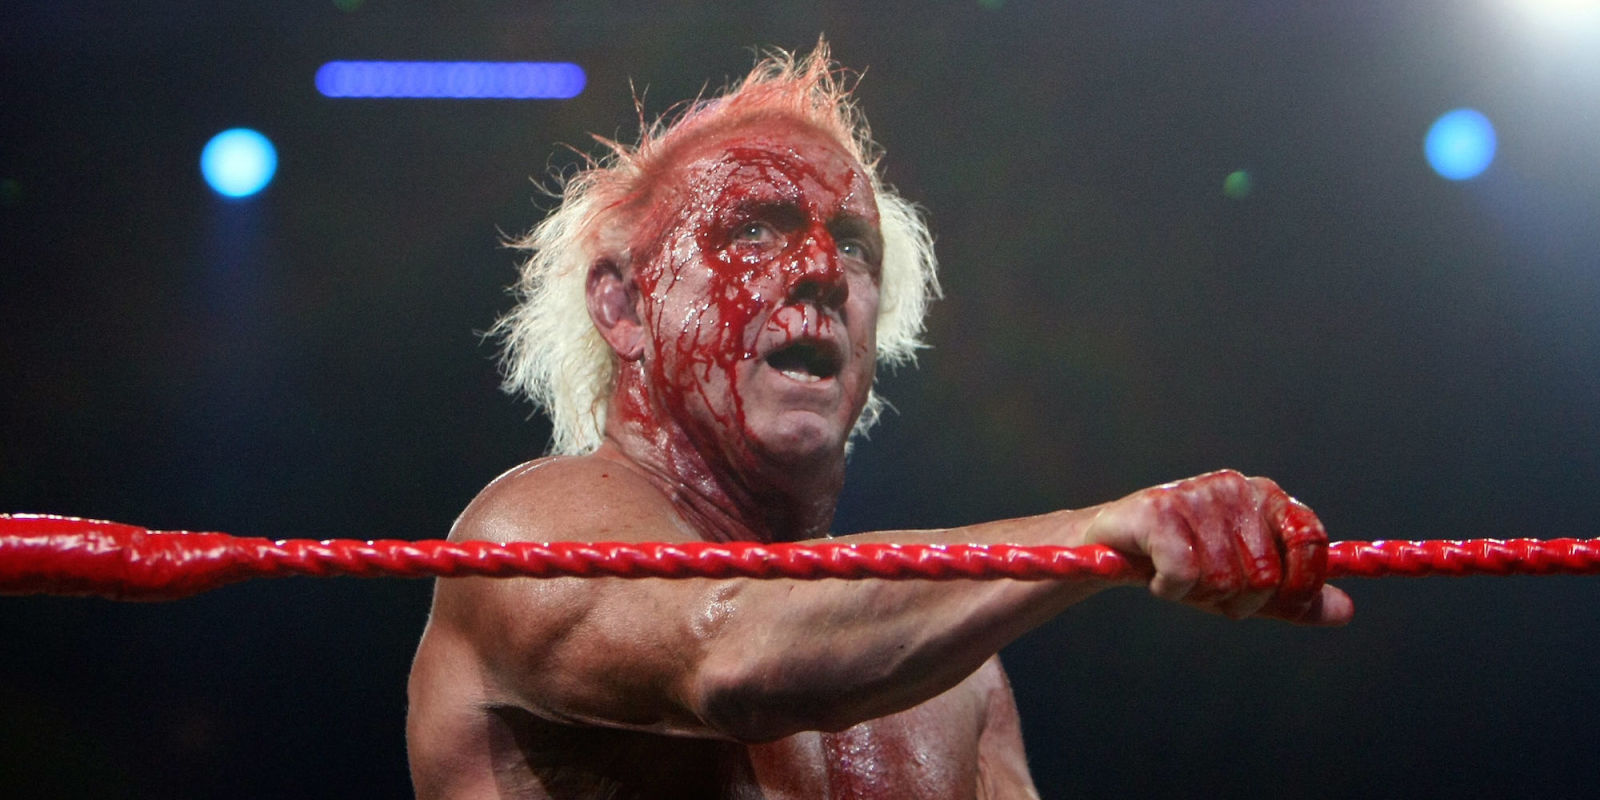 Ric Flair juicing. Courtesy World Wrestling Entertainment.